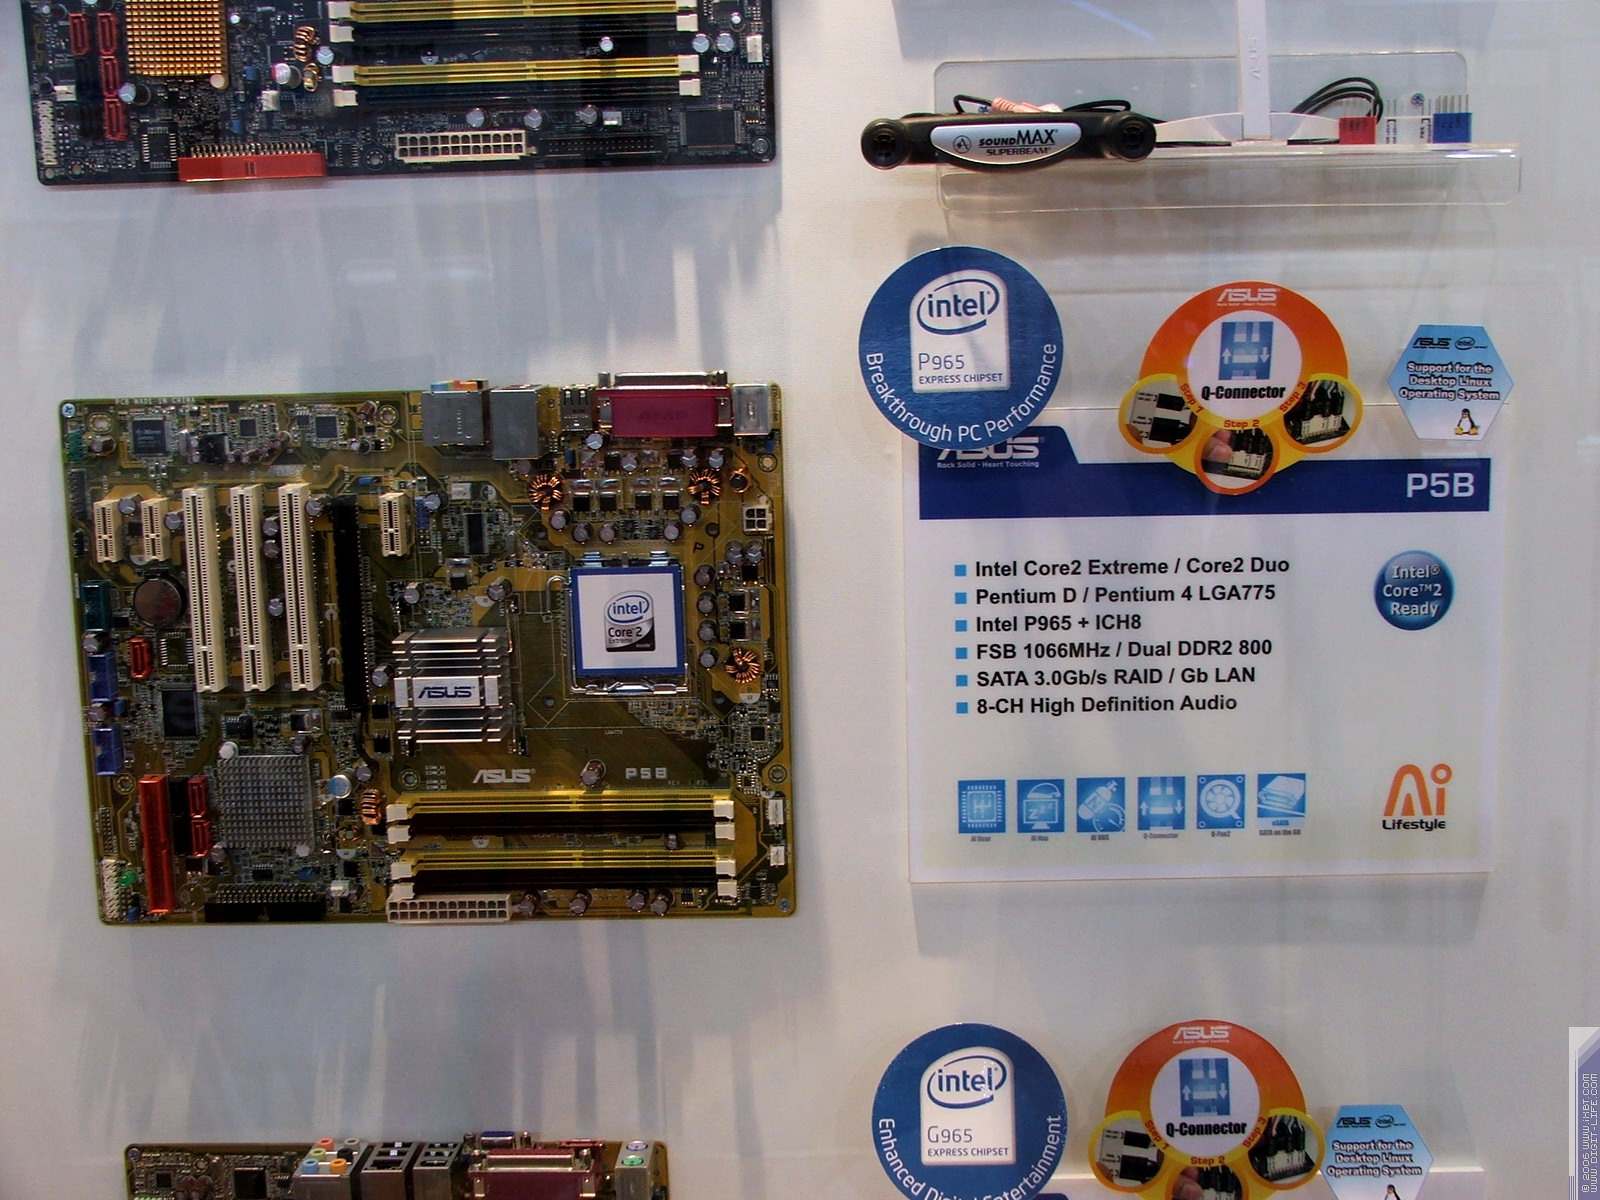 Intel 7 series chipset family